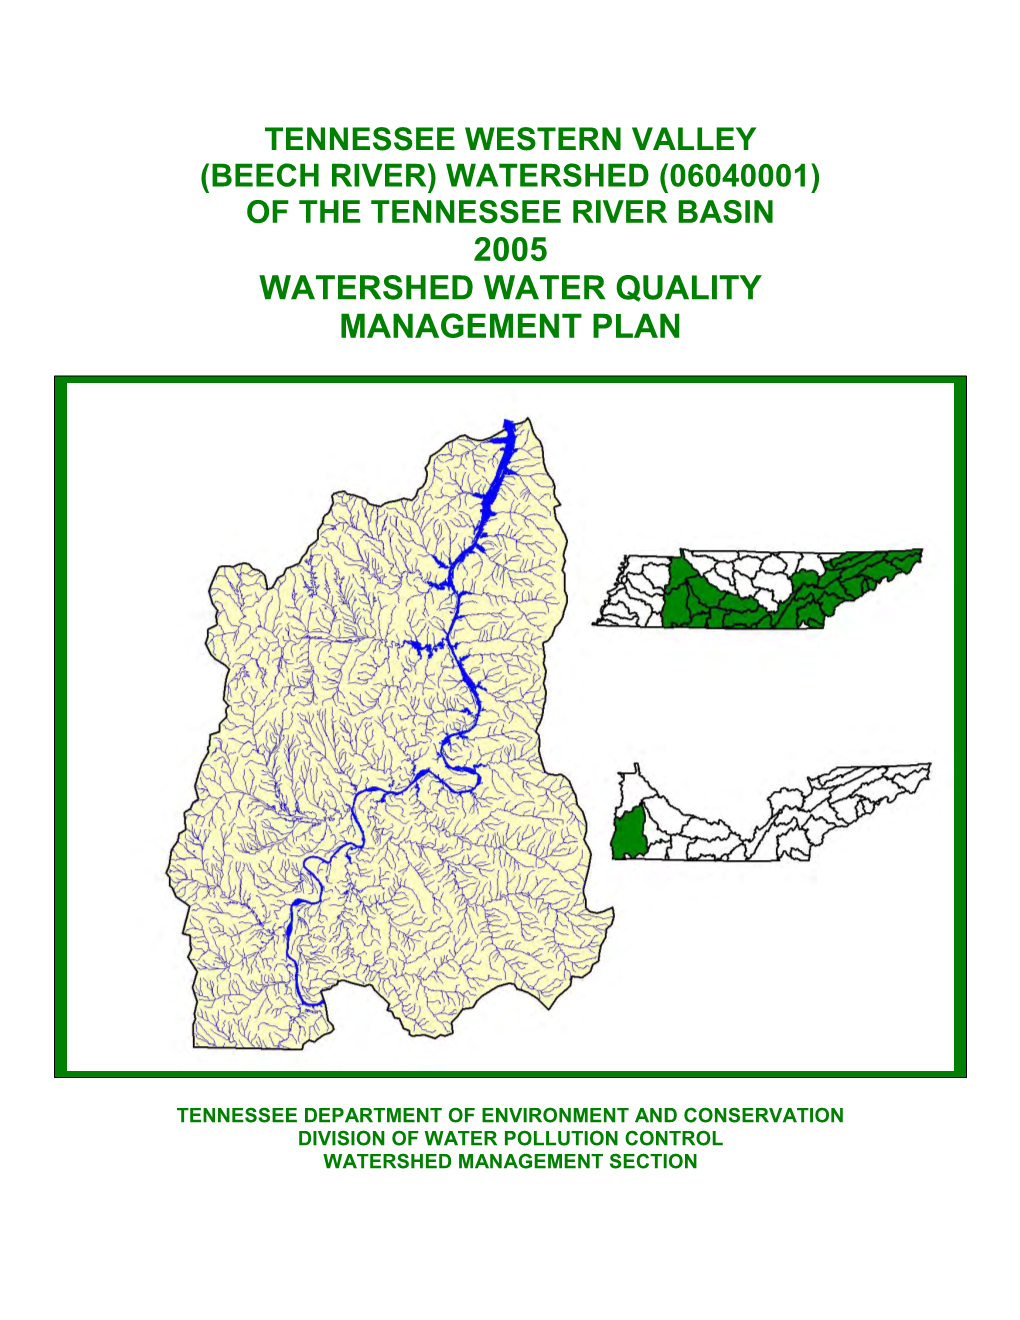 Beech River) Watershed (06040001) of the Tennessee River Basin 2005 Watershed Water Quality Management Plan